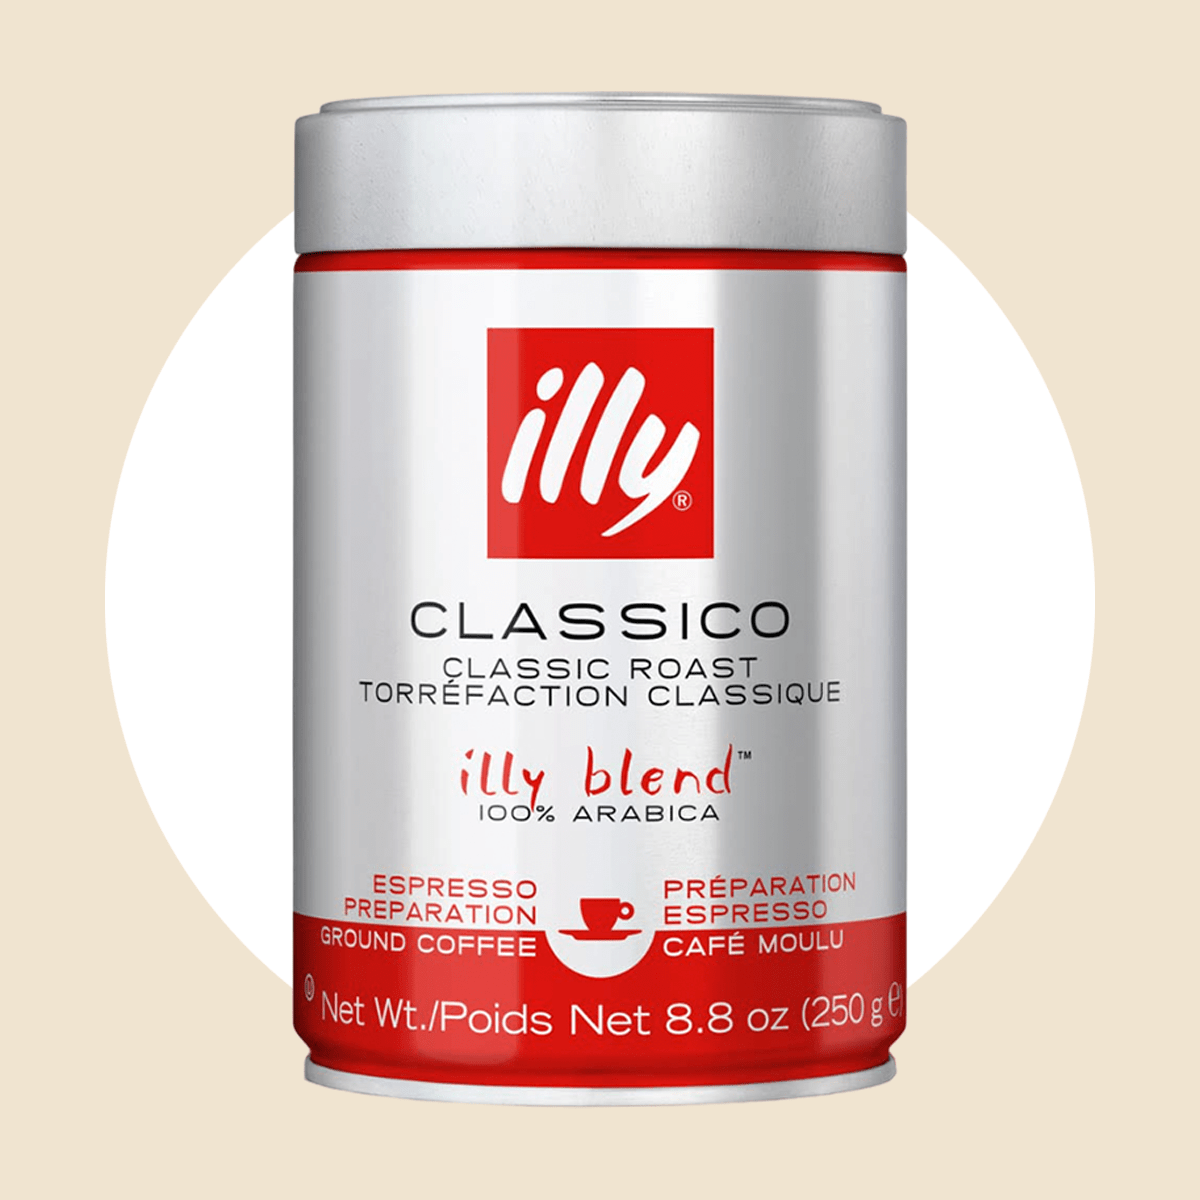 Illy Classico Illy Blend Coffee